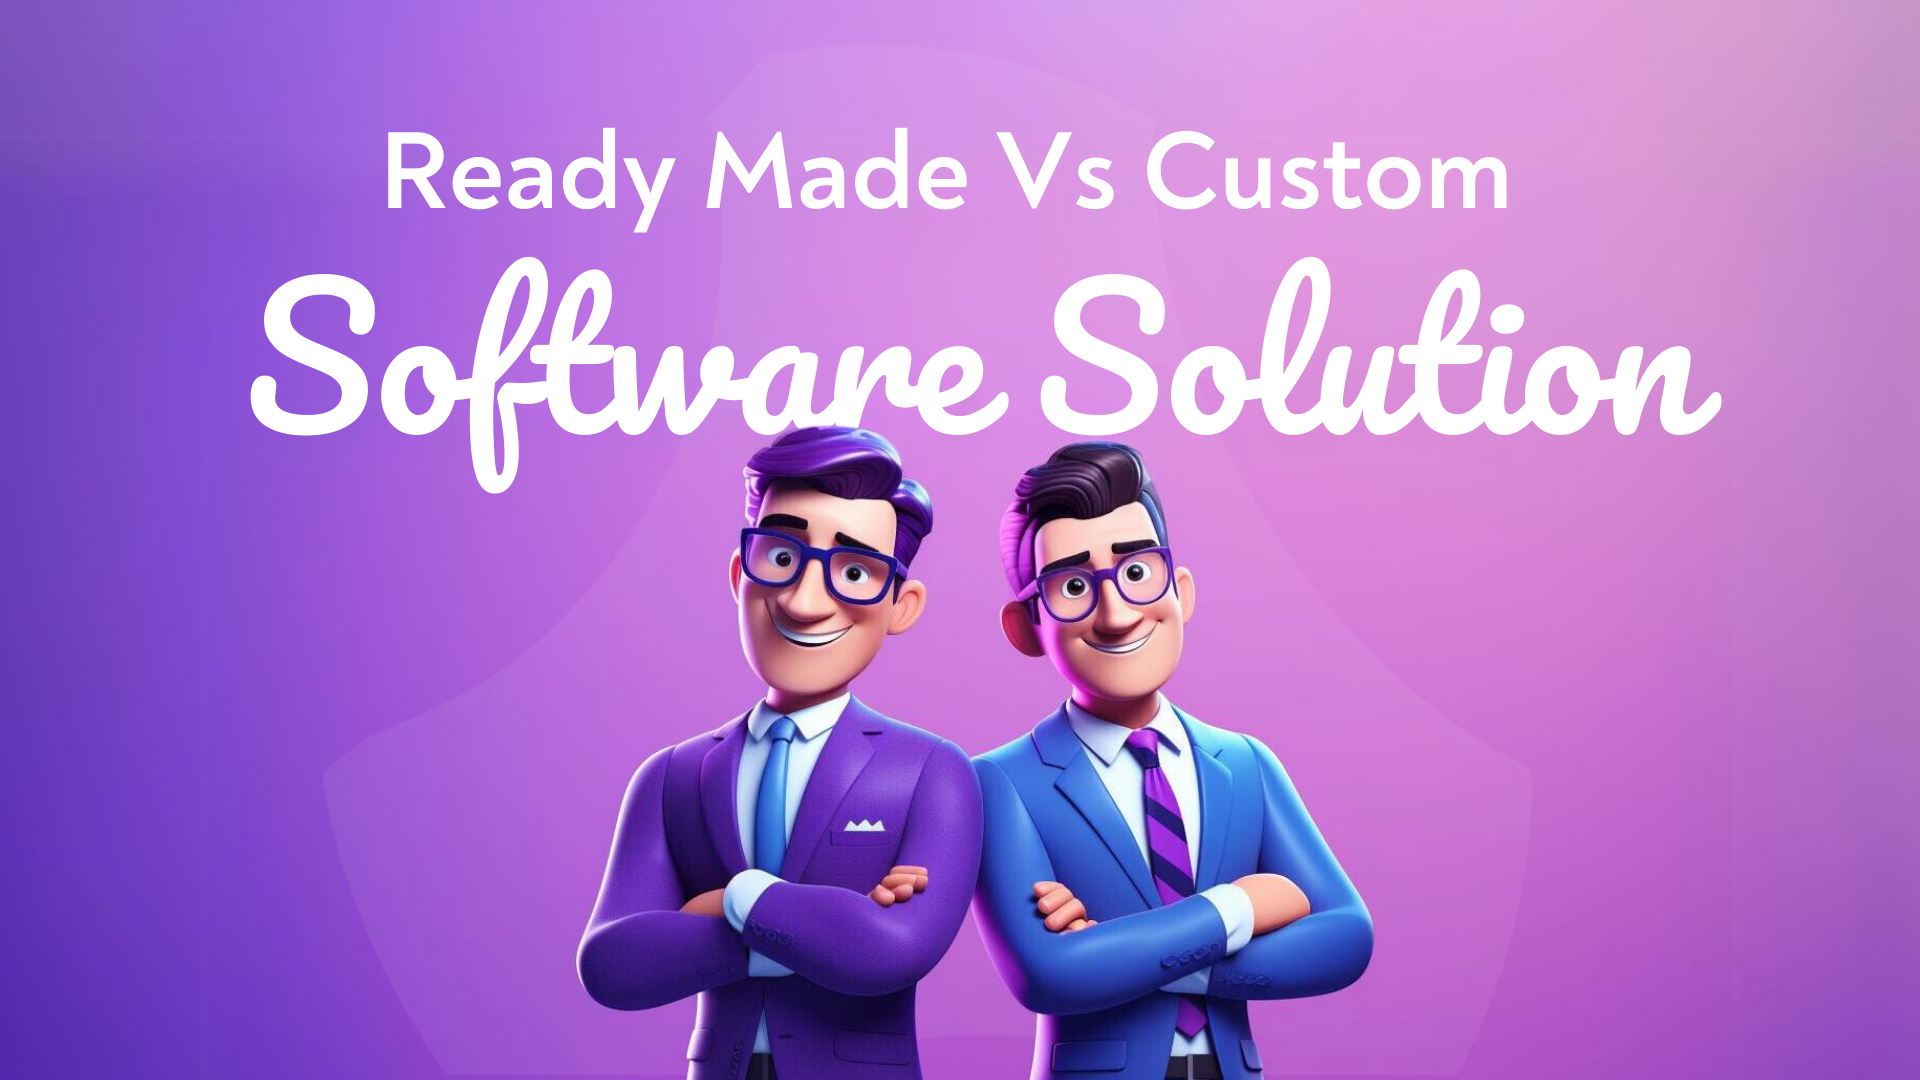 Ready-Made vs. Custom Sofware Solution for your business.